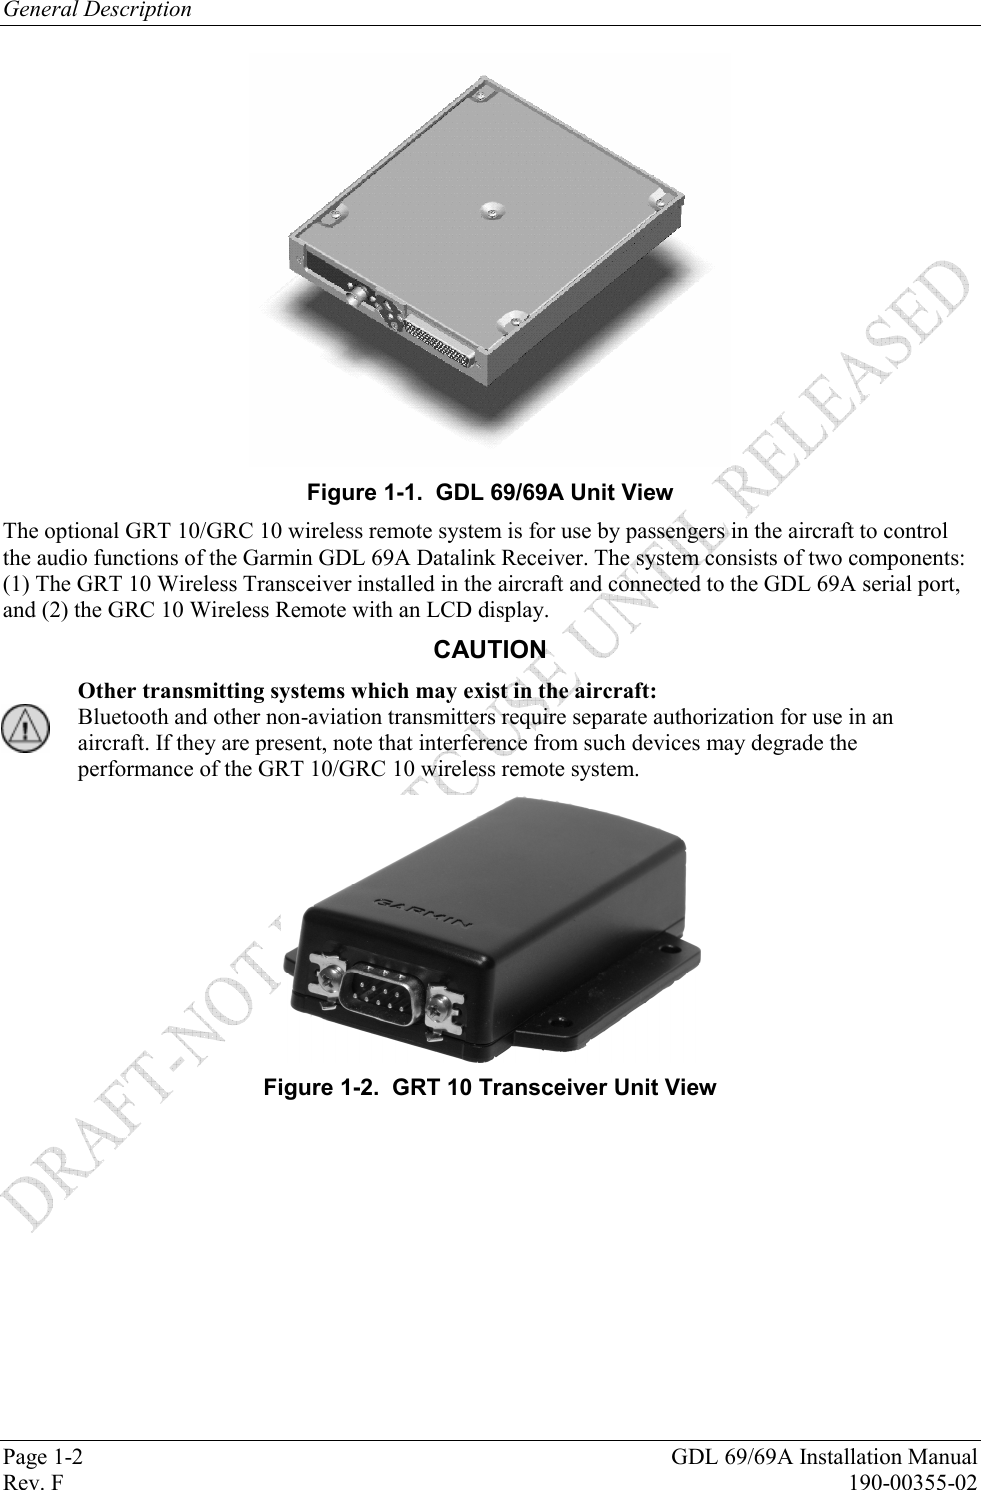 General Description Page 1-2  GDL 69/69A Installation Manual Rev. F  190-00355-02  Figure 1-1.  GDL 69/69A Unit View The optional GRT 10/GRC 10 wireless remote system is for use by passengers in the aircraft to control the audio functions of the Garmin GDL 69A Datalink Receiver. The system consists of two components: (1) The GRT 10 Wireless Transceiver installed in the aircraft and connected to the GDL 69A serial port, and (2) the GRC 10 Wireless Remote with an LCD display. CAUTION Other transmitting systems which may exist in the aircraft:  Bluetooth and other non-aviation transmitters require separate authorization for use in an aircraft. If they are present, note that interference from such devices may degrade the performance of the GRT 10/GRC 10 wireless remote system.  Figure 1-2.  GRT 10 Transceiver Unit View  